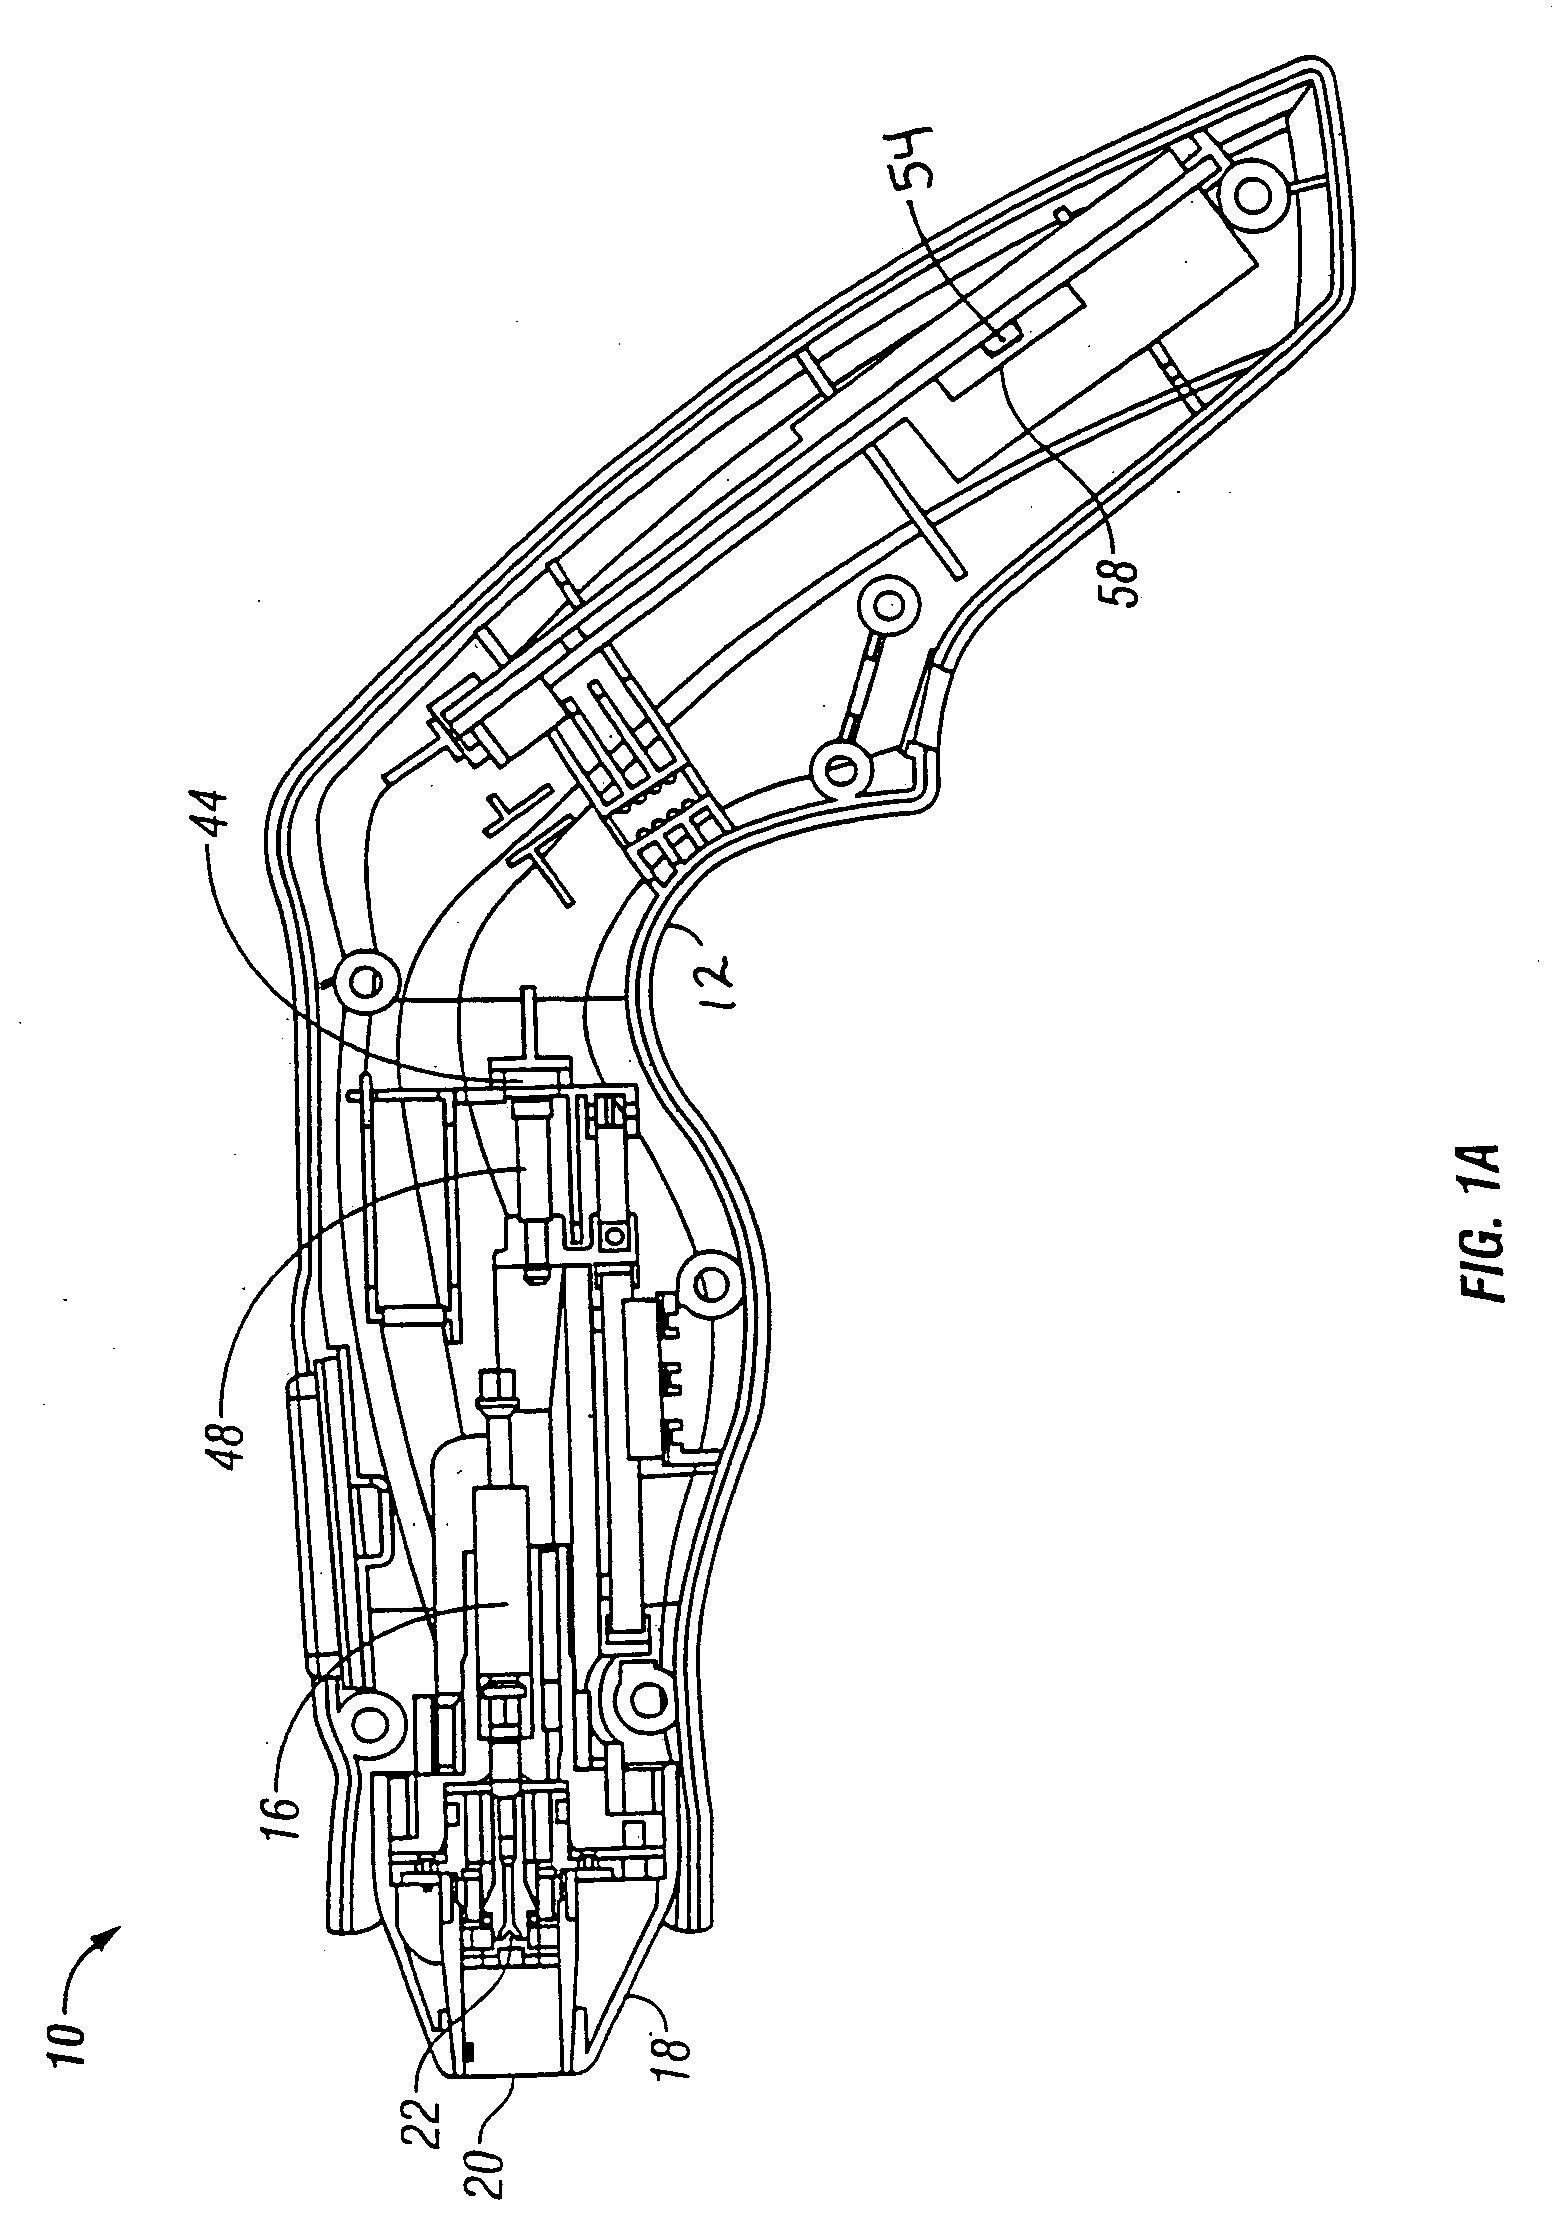 Handpiece with RF electrode and non-volatile memory